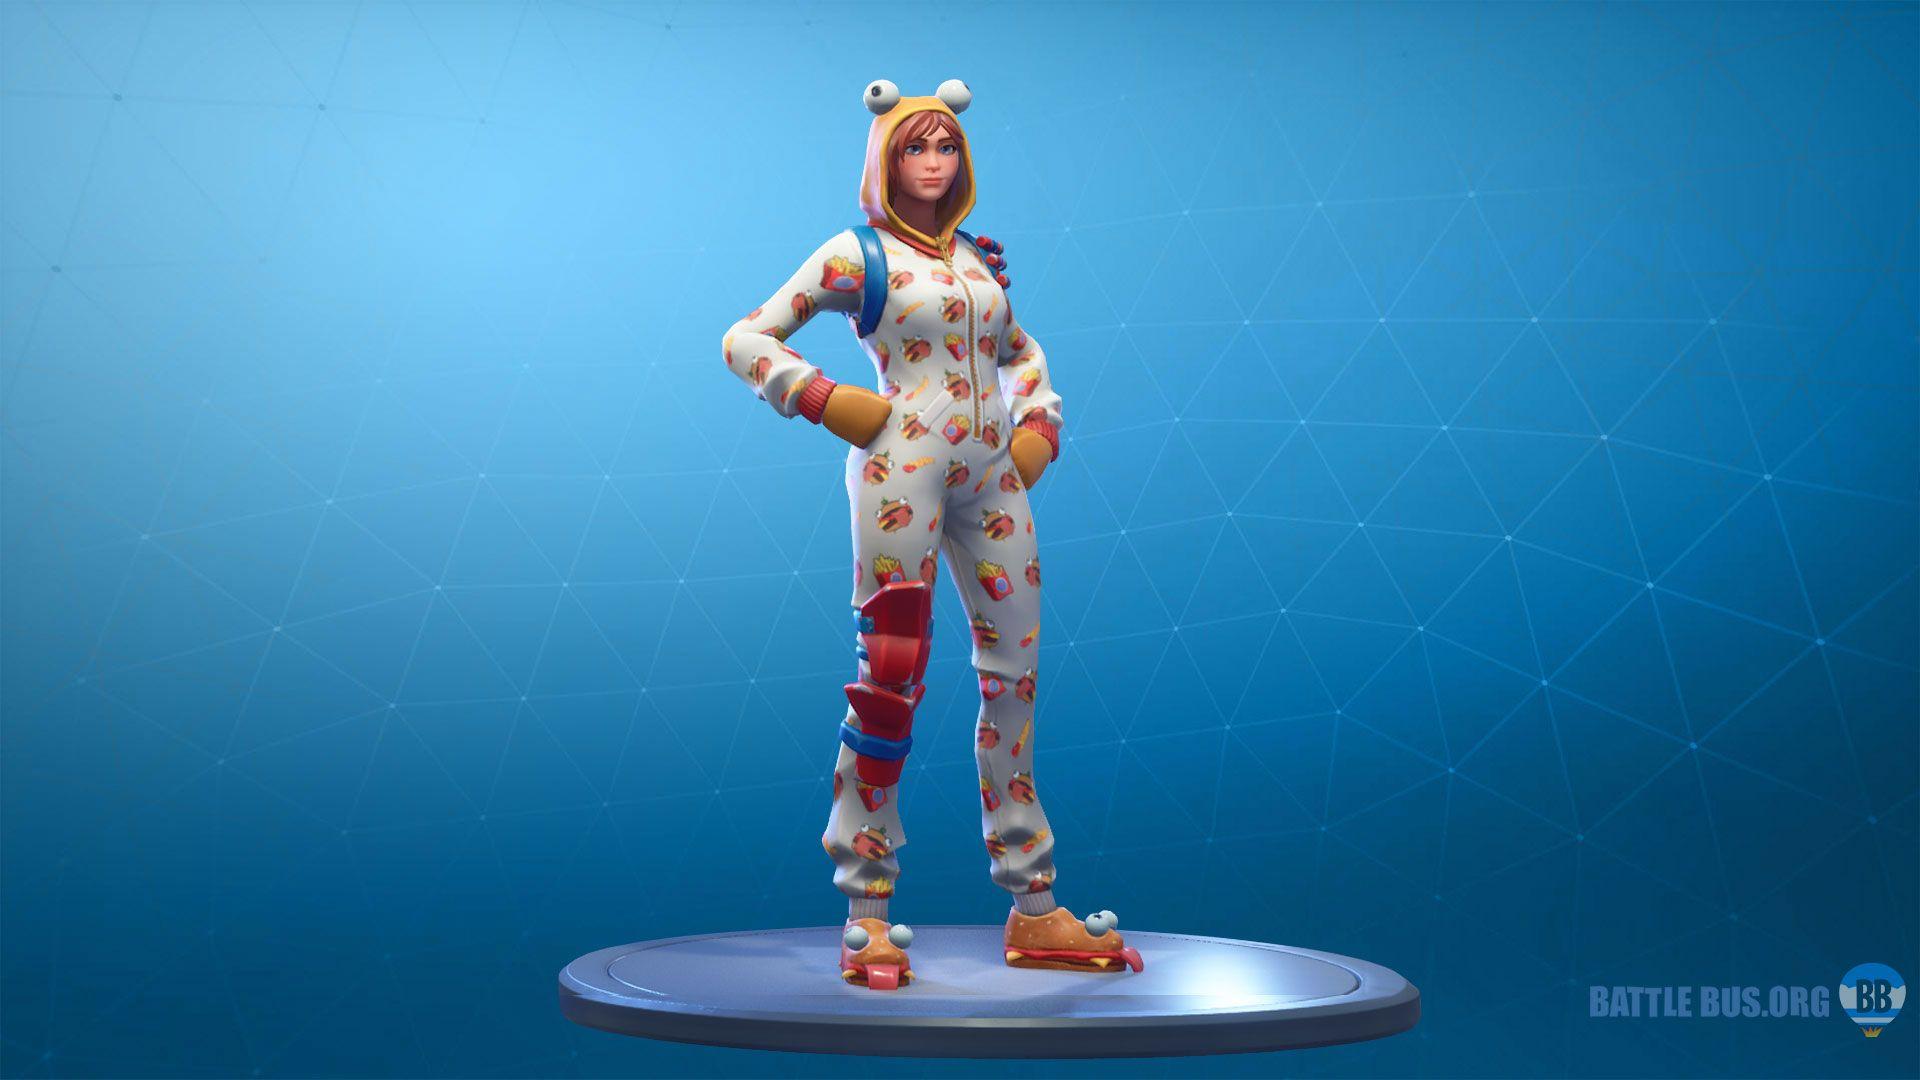 Onesie Fortnite skin quality imges of skins, info and stats